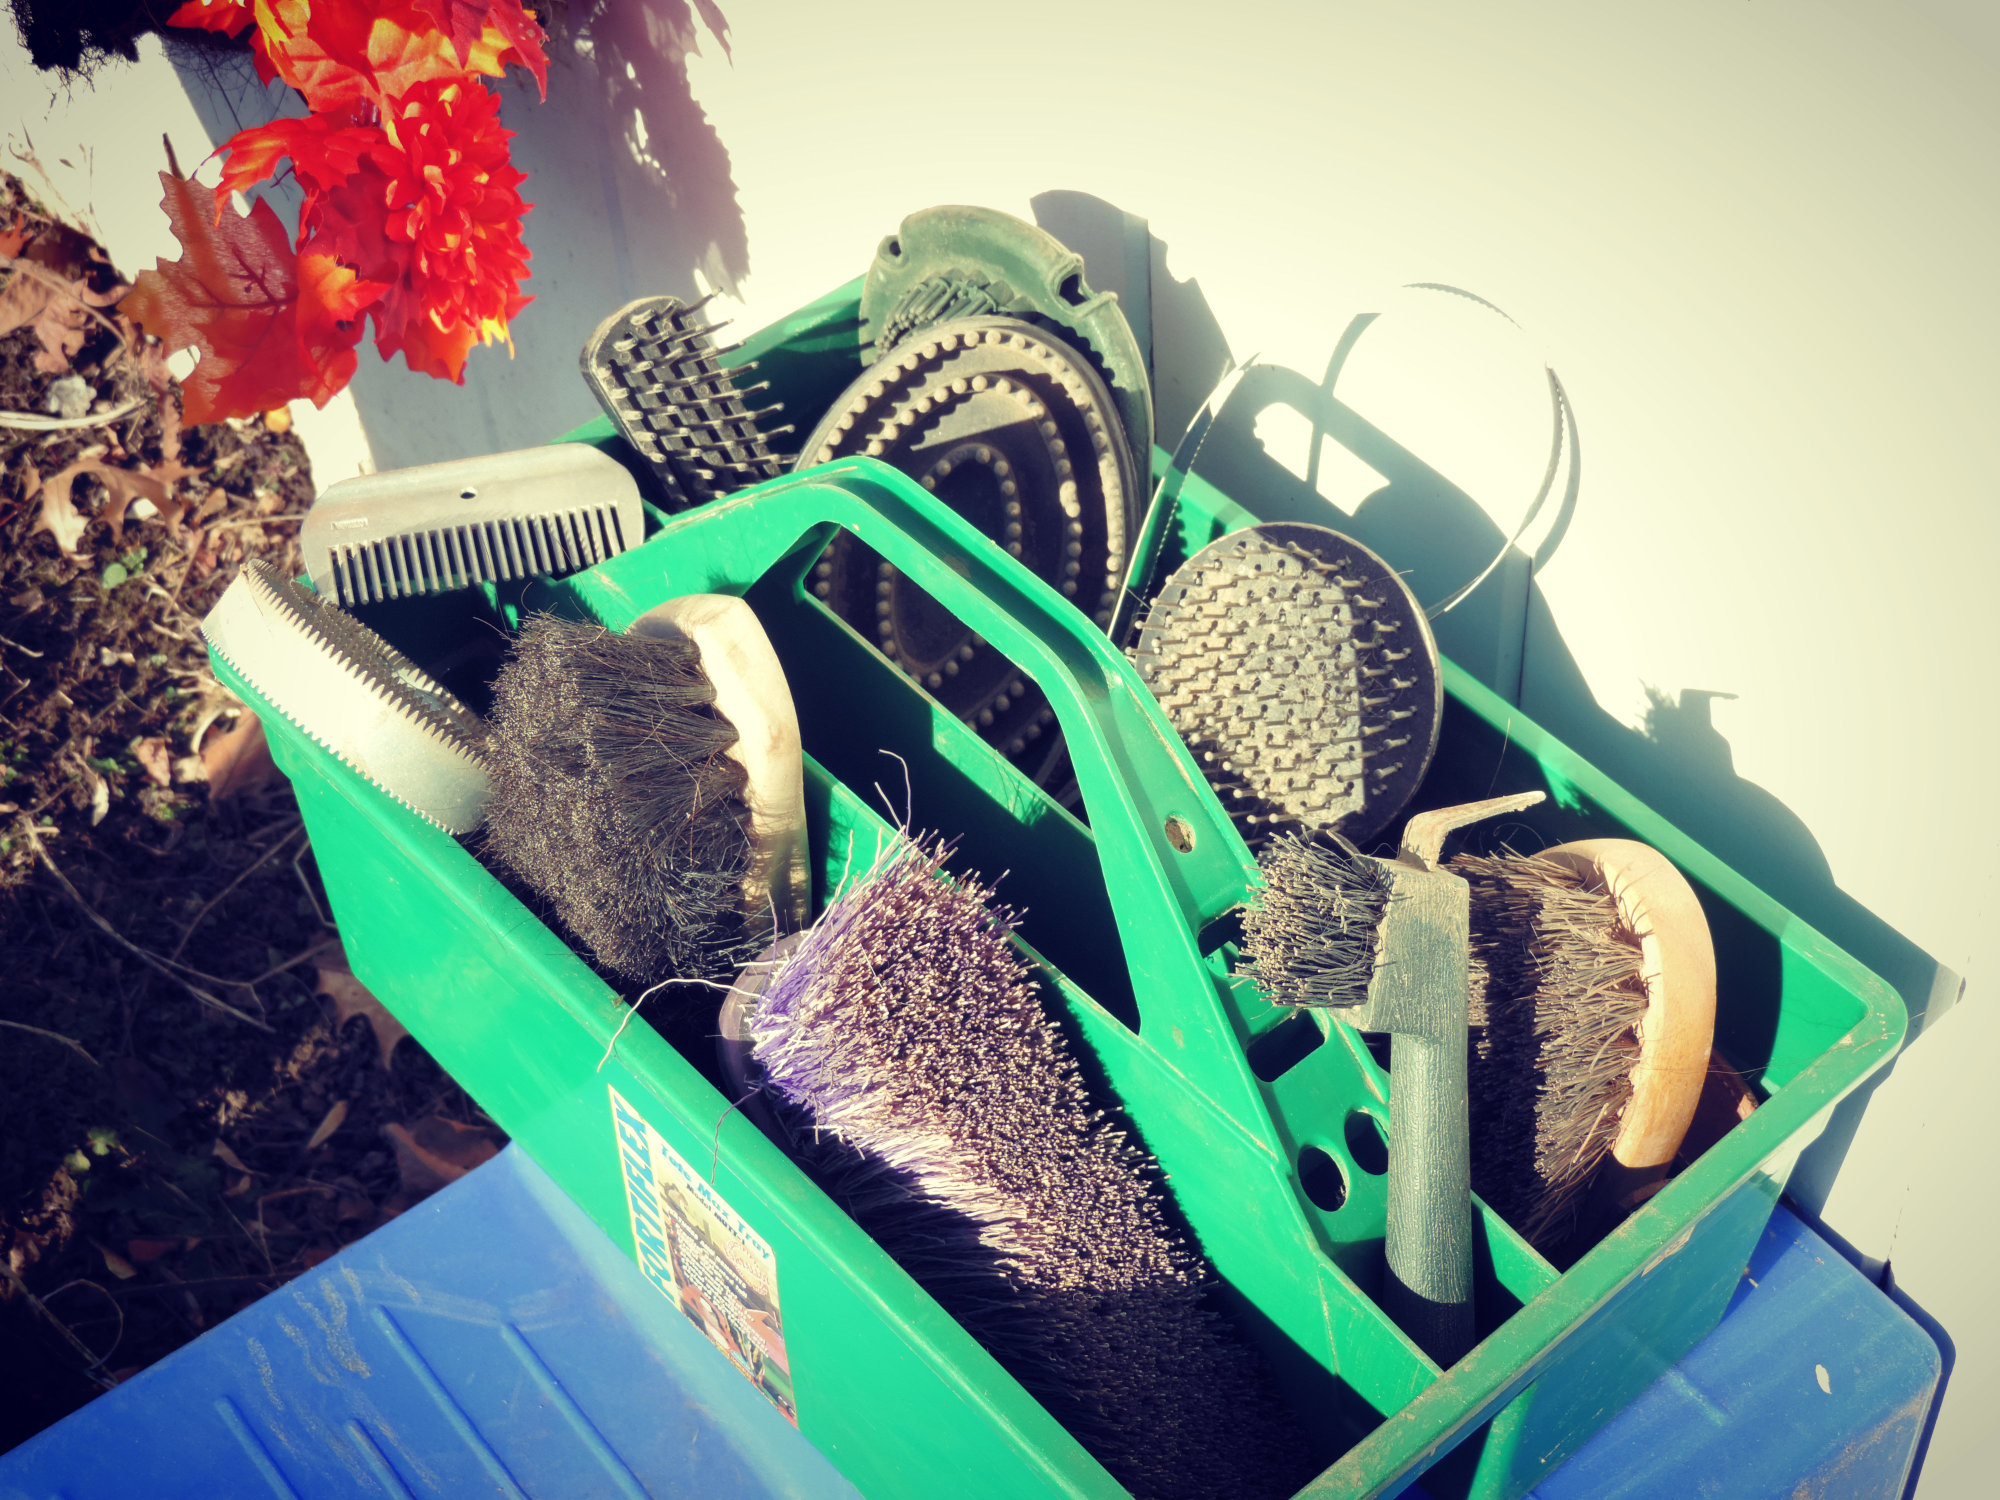 Typical Grooming Box - FULL of brushes